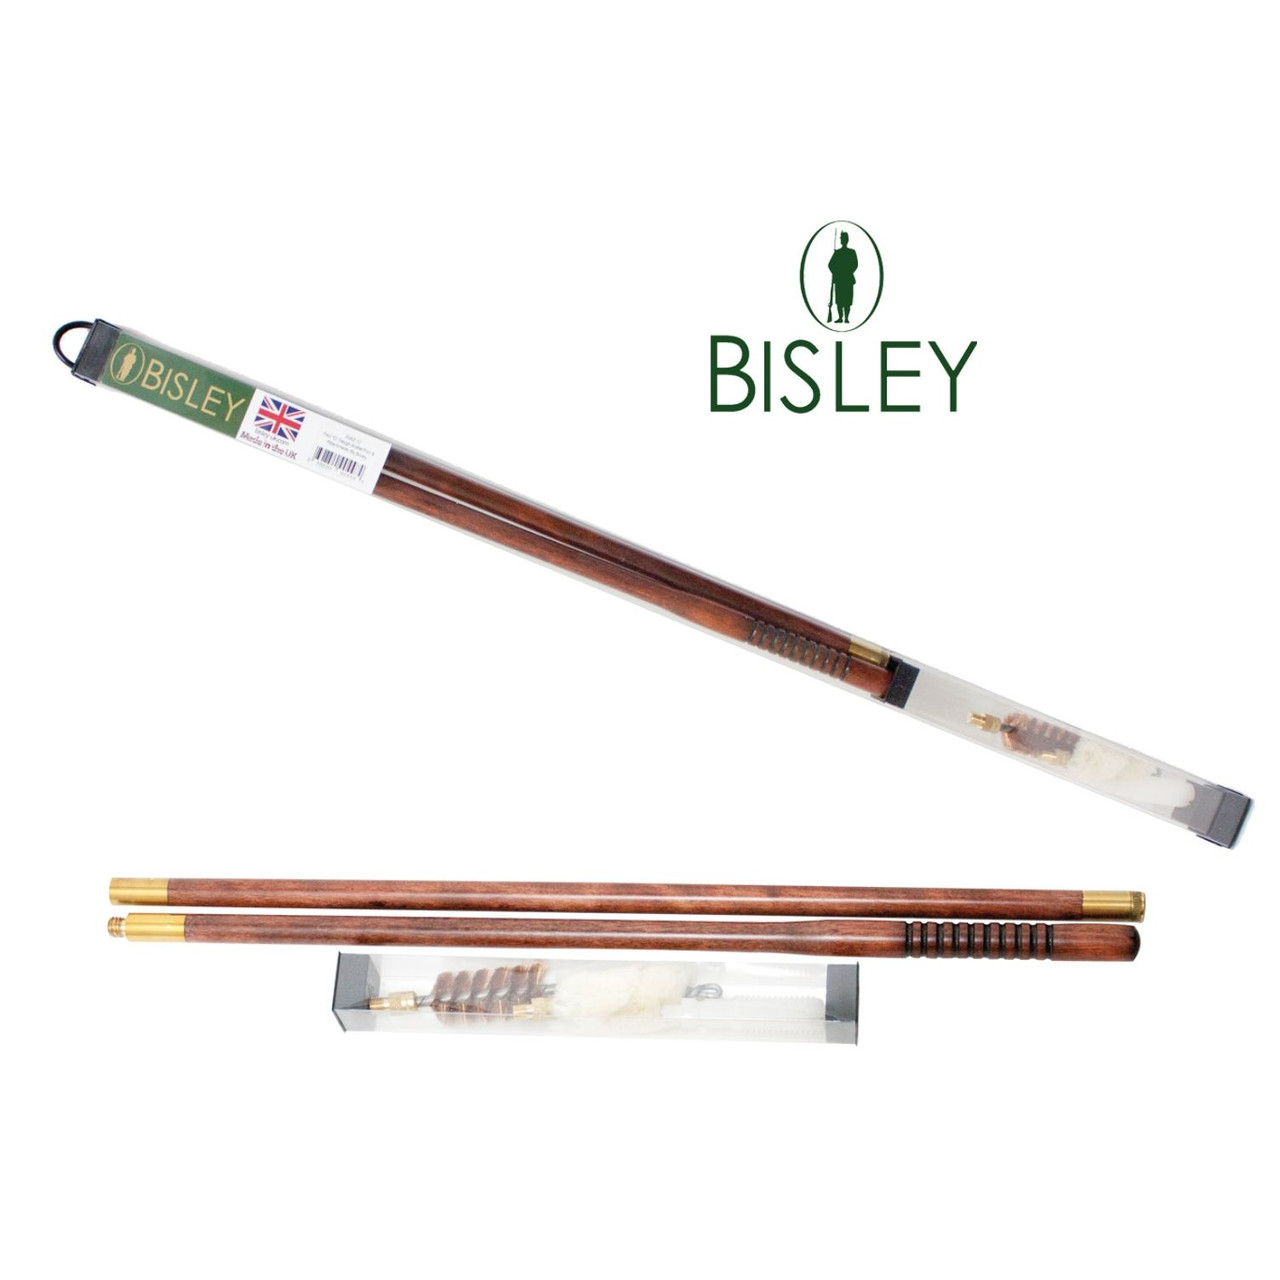 Bisley 12 Gauge Cleaning Kit 2 Part Wooden Rod & Attachments